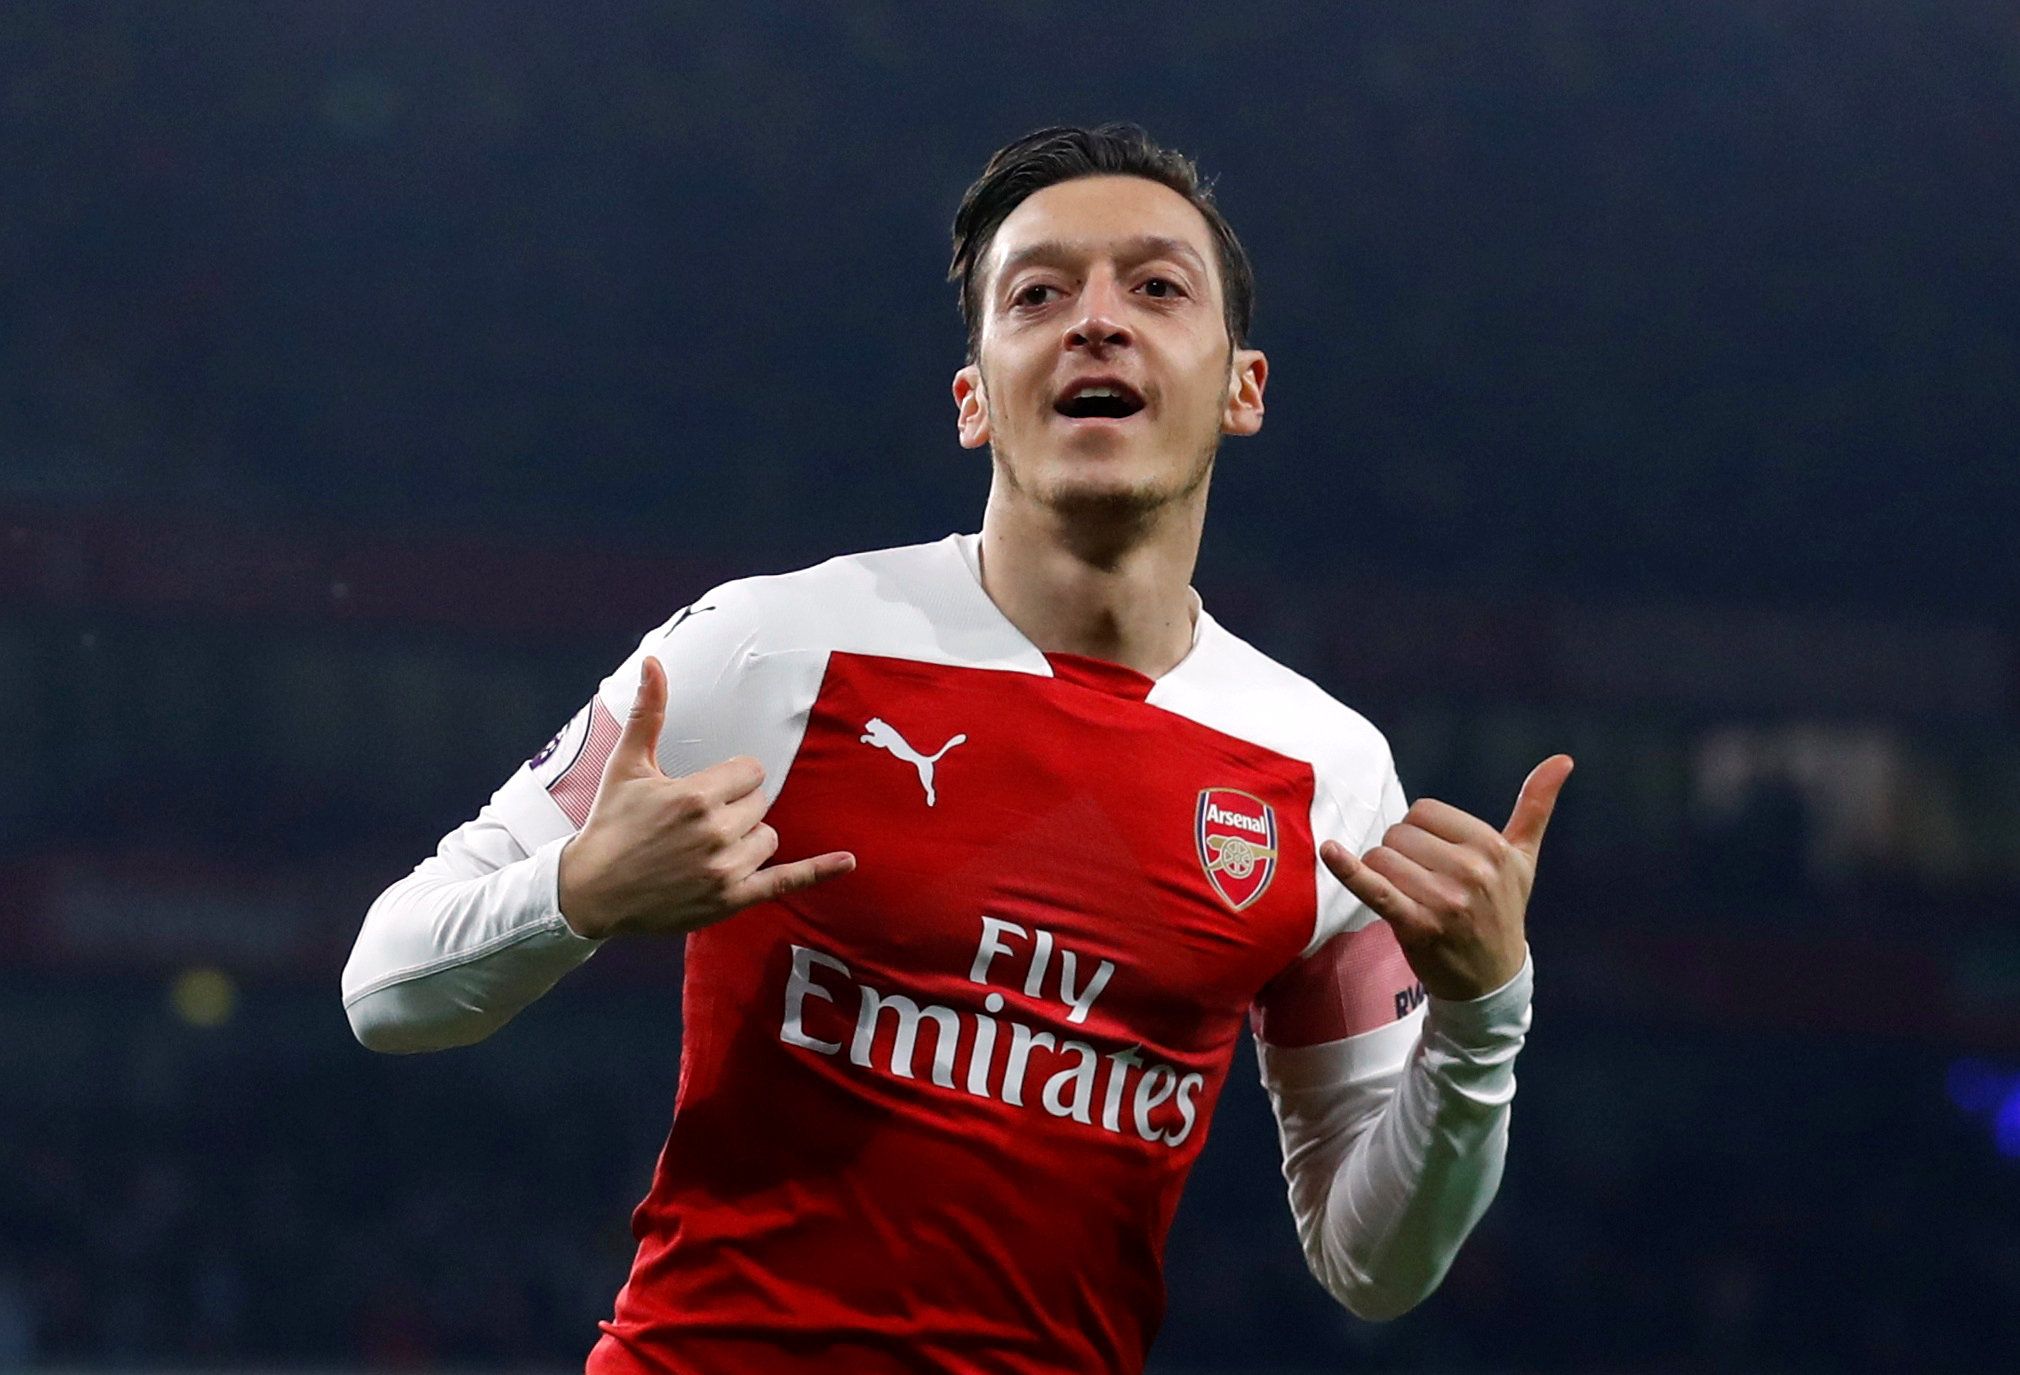 Soccer Football - Premier League - Arsenal v AFC Bournemouth - Emirates Stadium, London, Britain - February 27, 2019  Arsenal's Mesut Ozil celebrates scoring their first goal      REUTERS/Eddie Keogh  EDITORIAL USE ONLY. No use with unauthorized audio, video, data, fixture lists, club/league logos or 